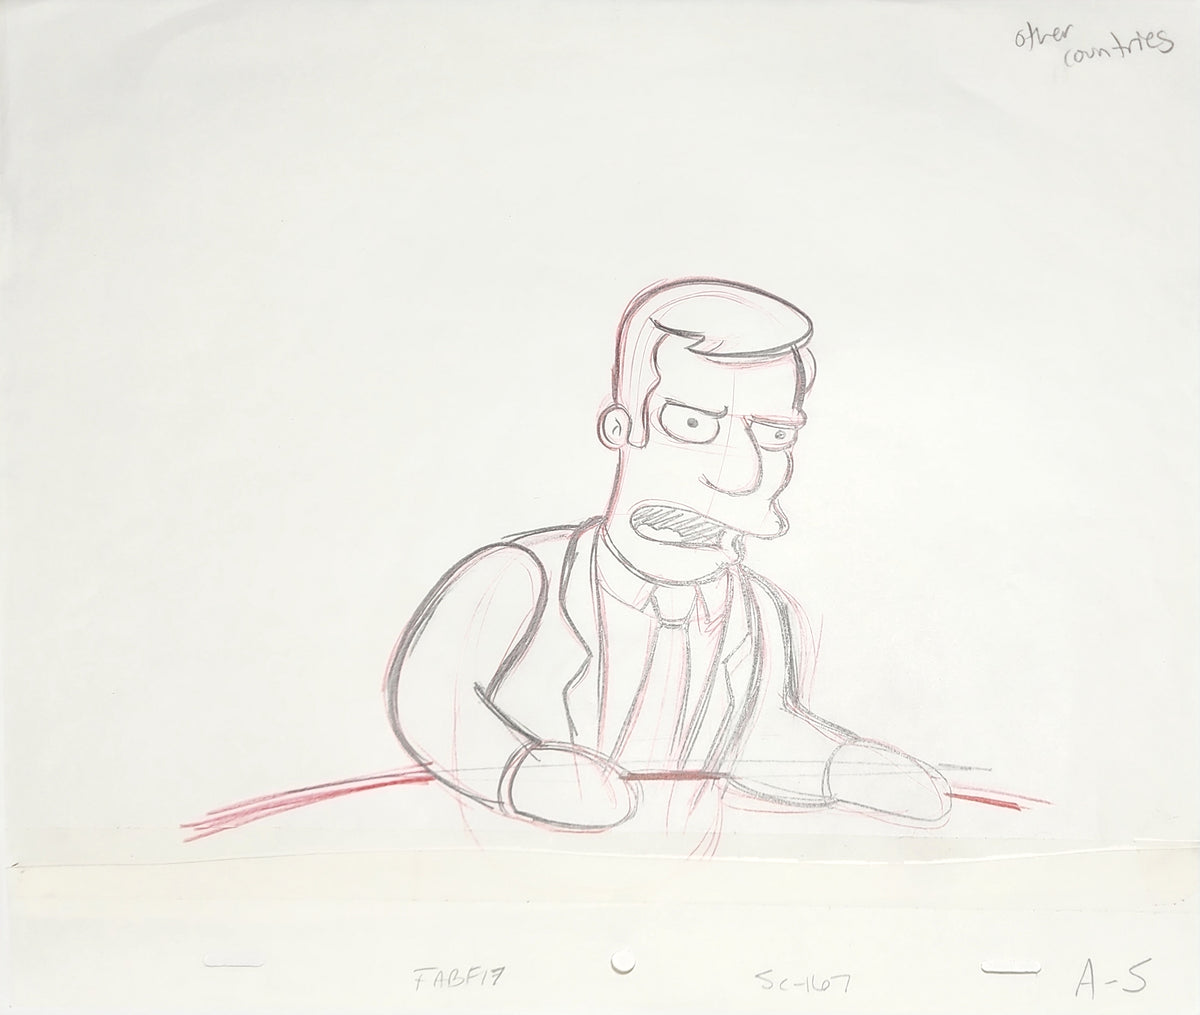 Simpsons Animation Production Cel Drawing: 3920